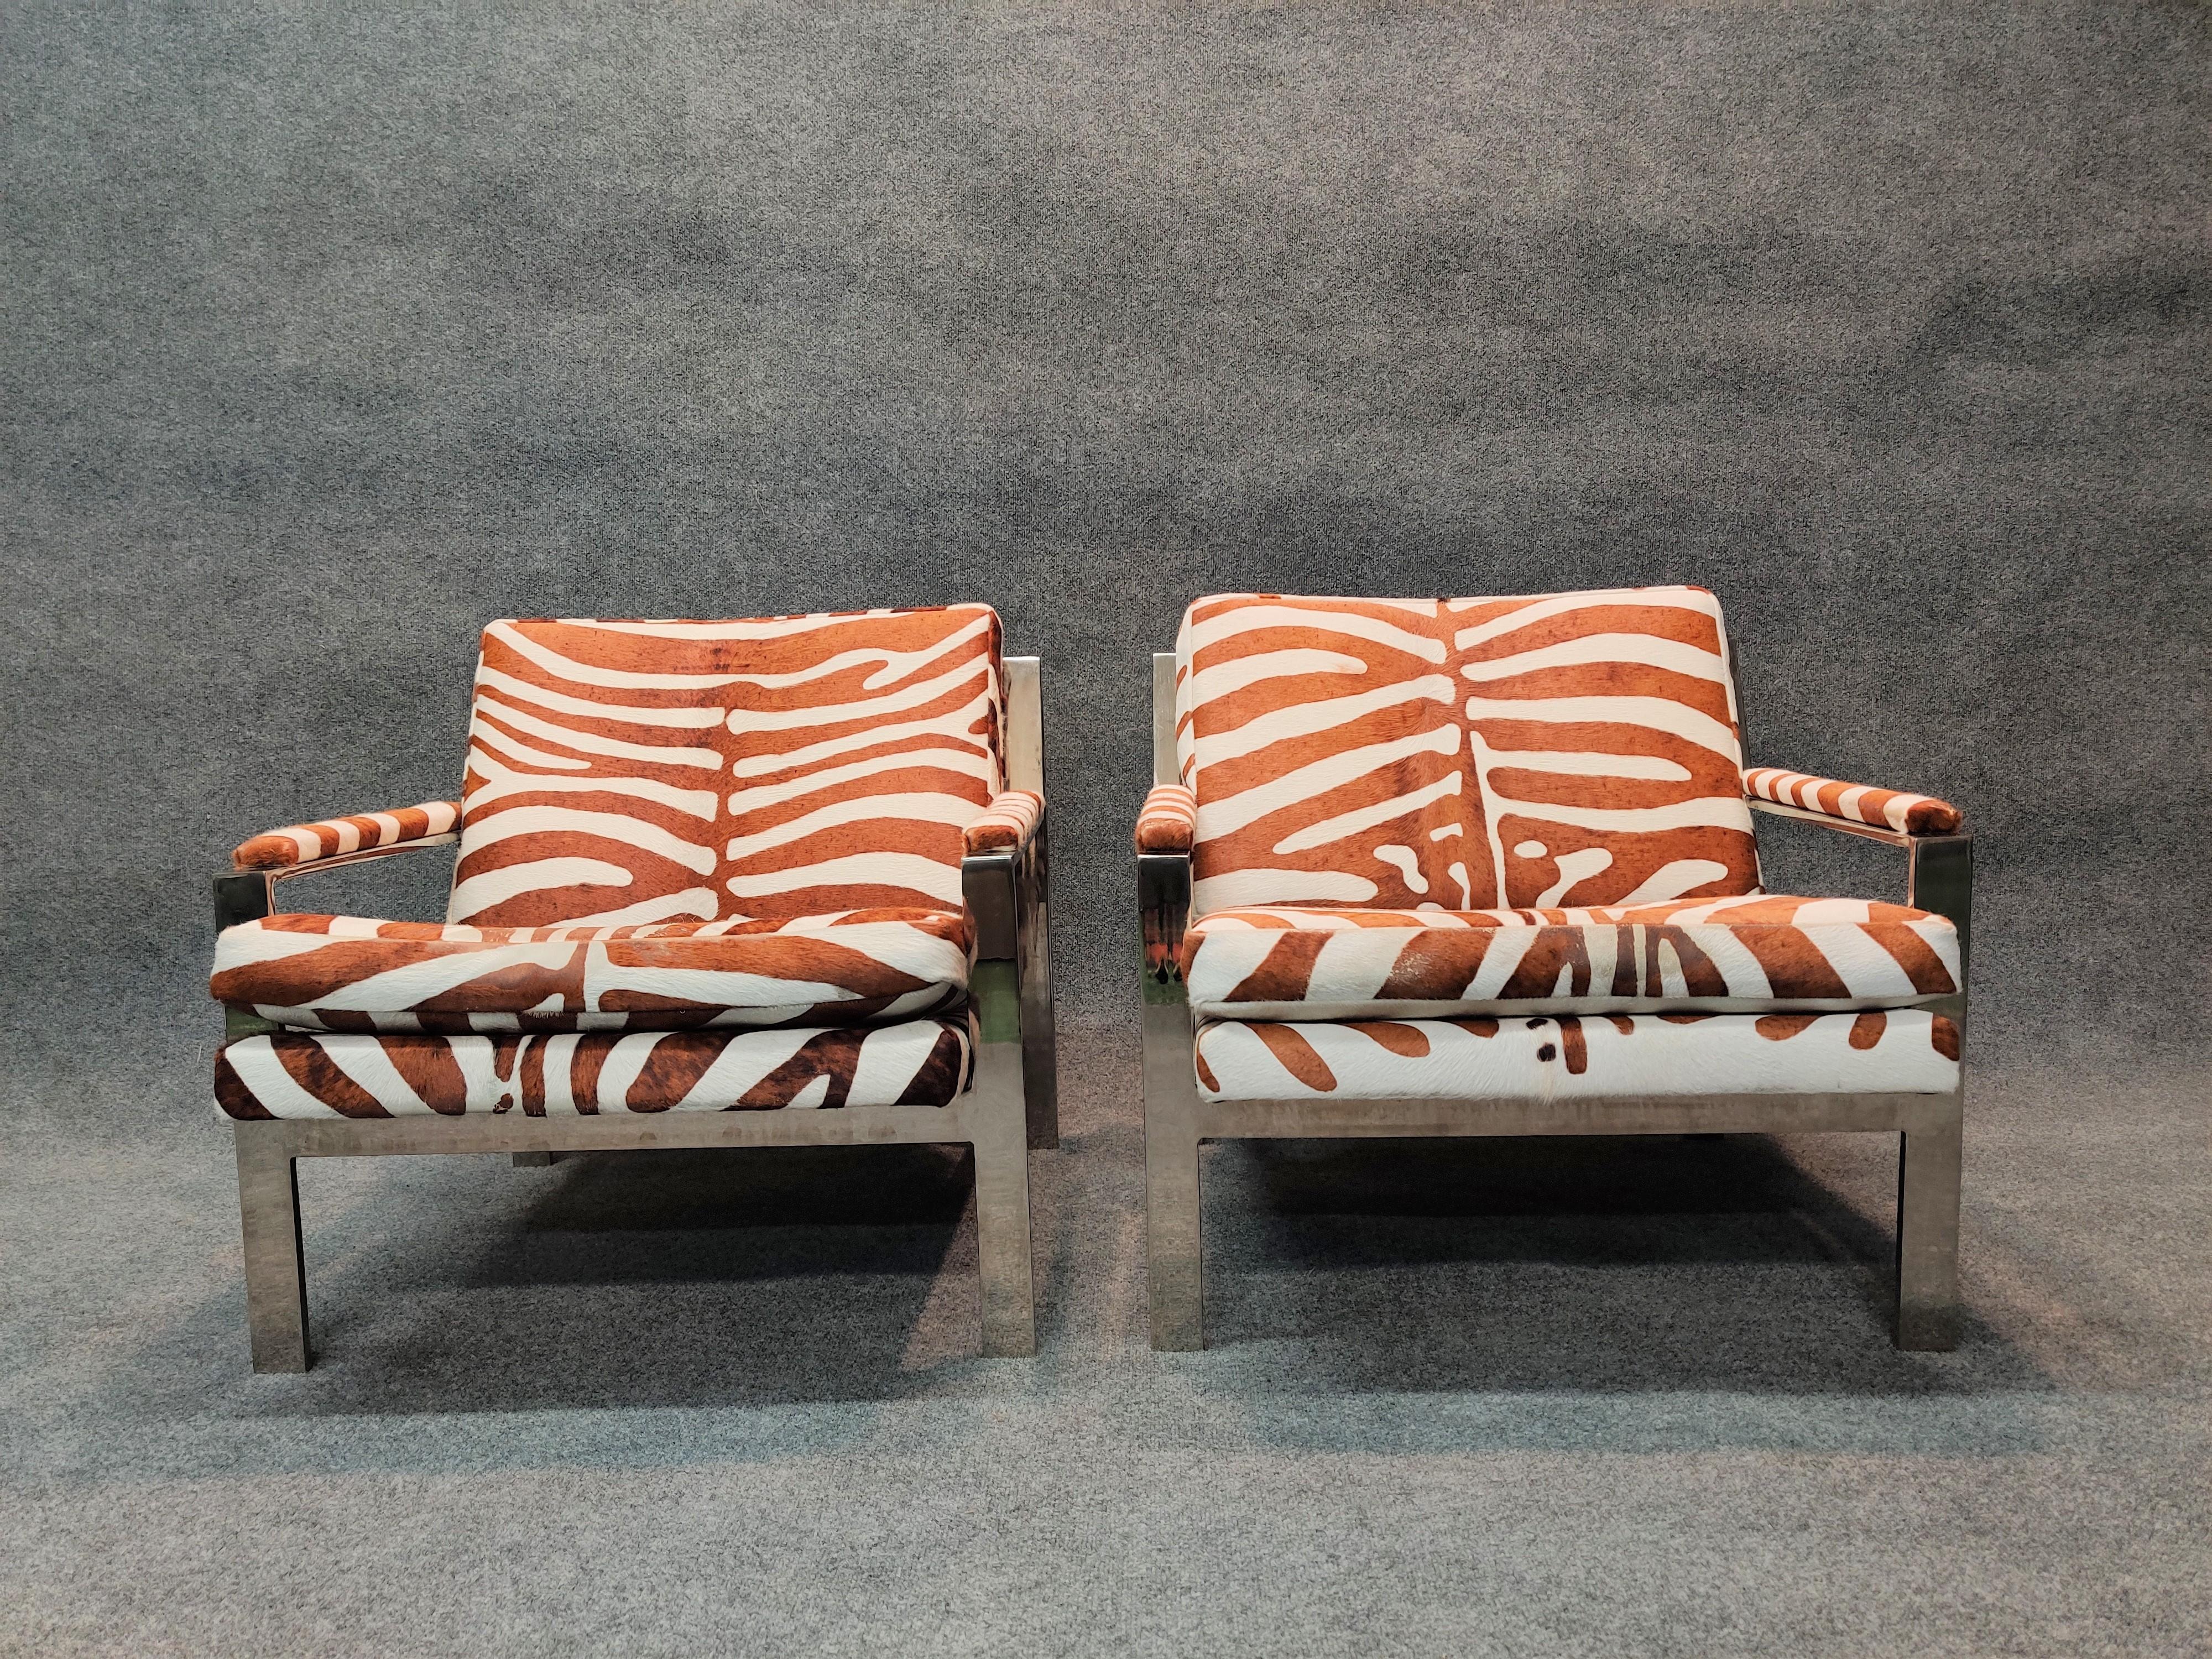 Pair of solid bar steel with chrome finish frames and printed zebra-printed cowhide upholstery, These Cy Mann inspired chairs are classic modern design and will fit in any well appointed interior. Each chair weighs roughly 50 lbs. The finish on the